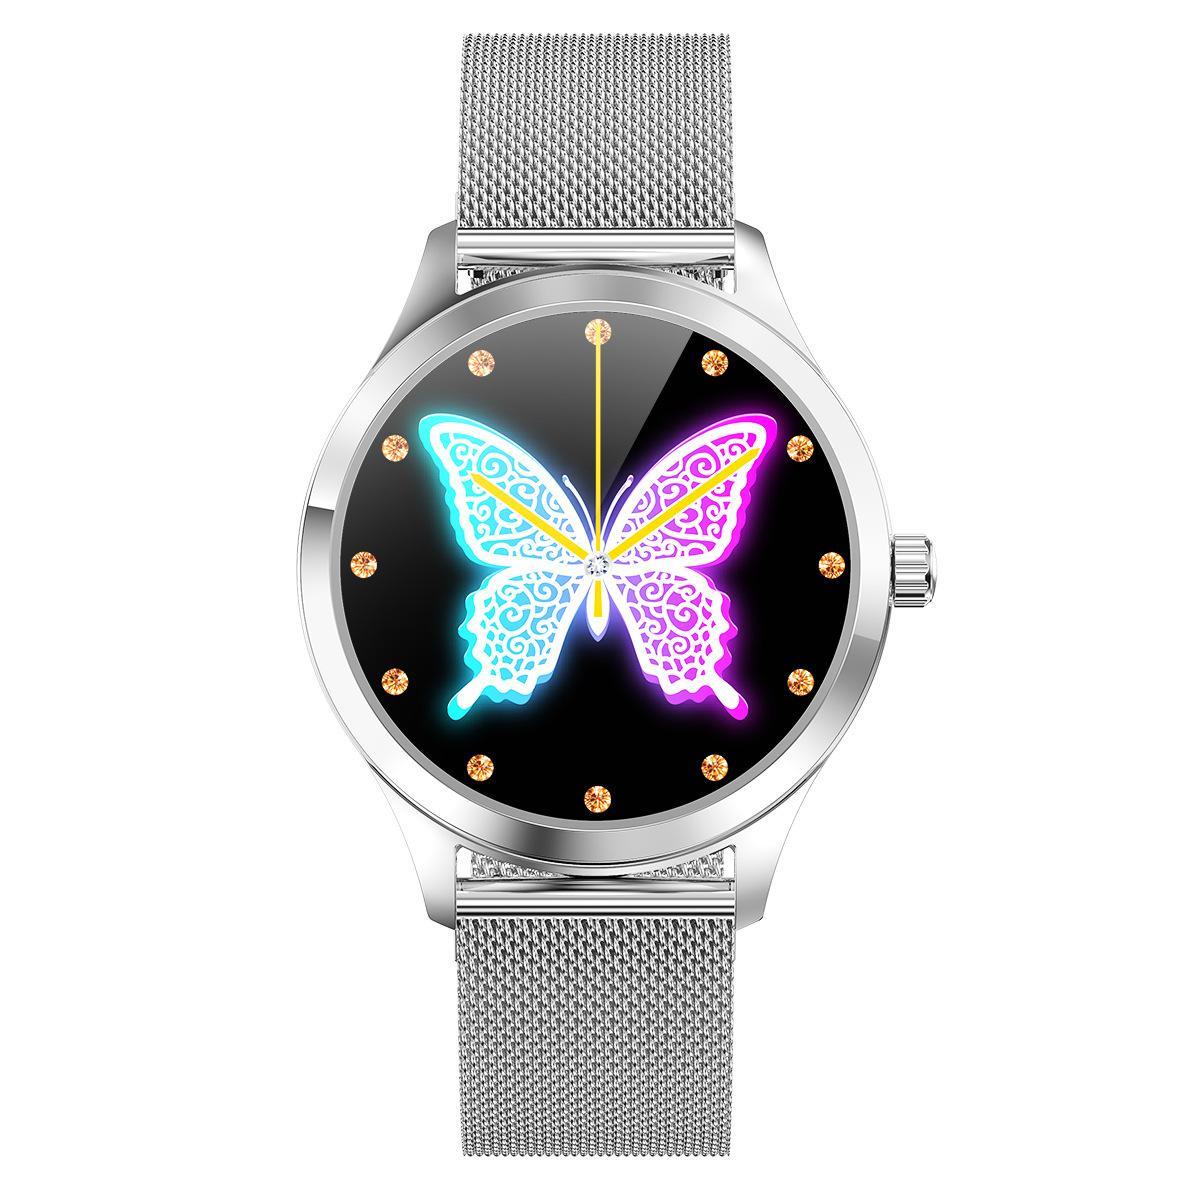 Ladys Smart Watch Women Watches Smartwatch Heart Rate Monitor For Android Xiaomi Samsung iPhone - Silver